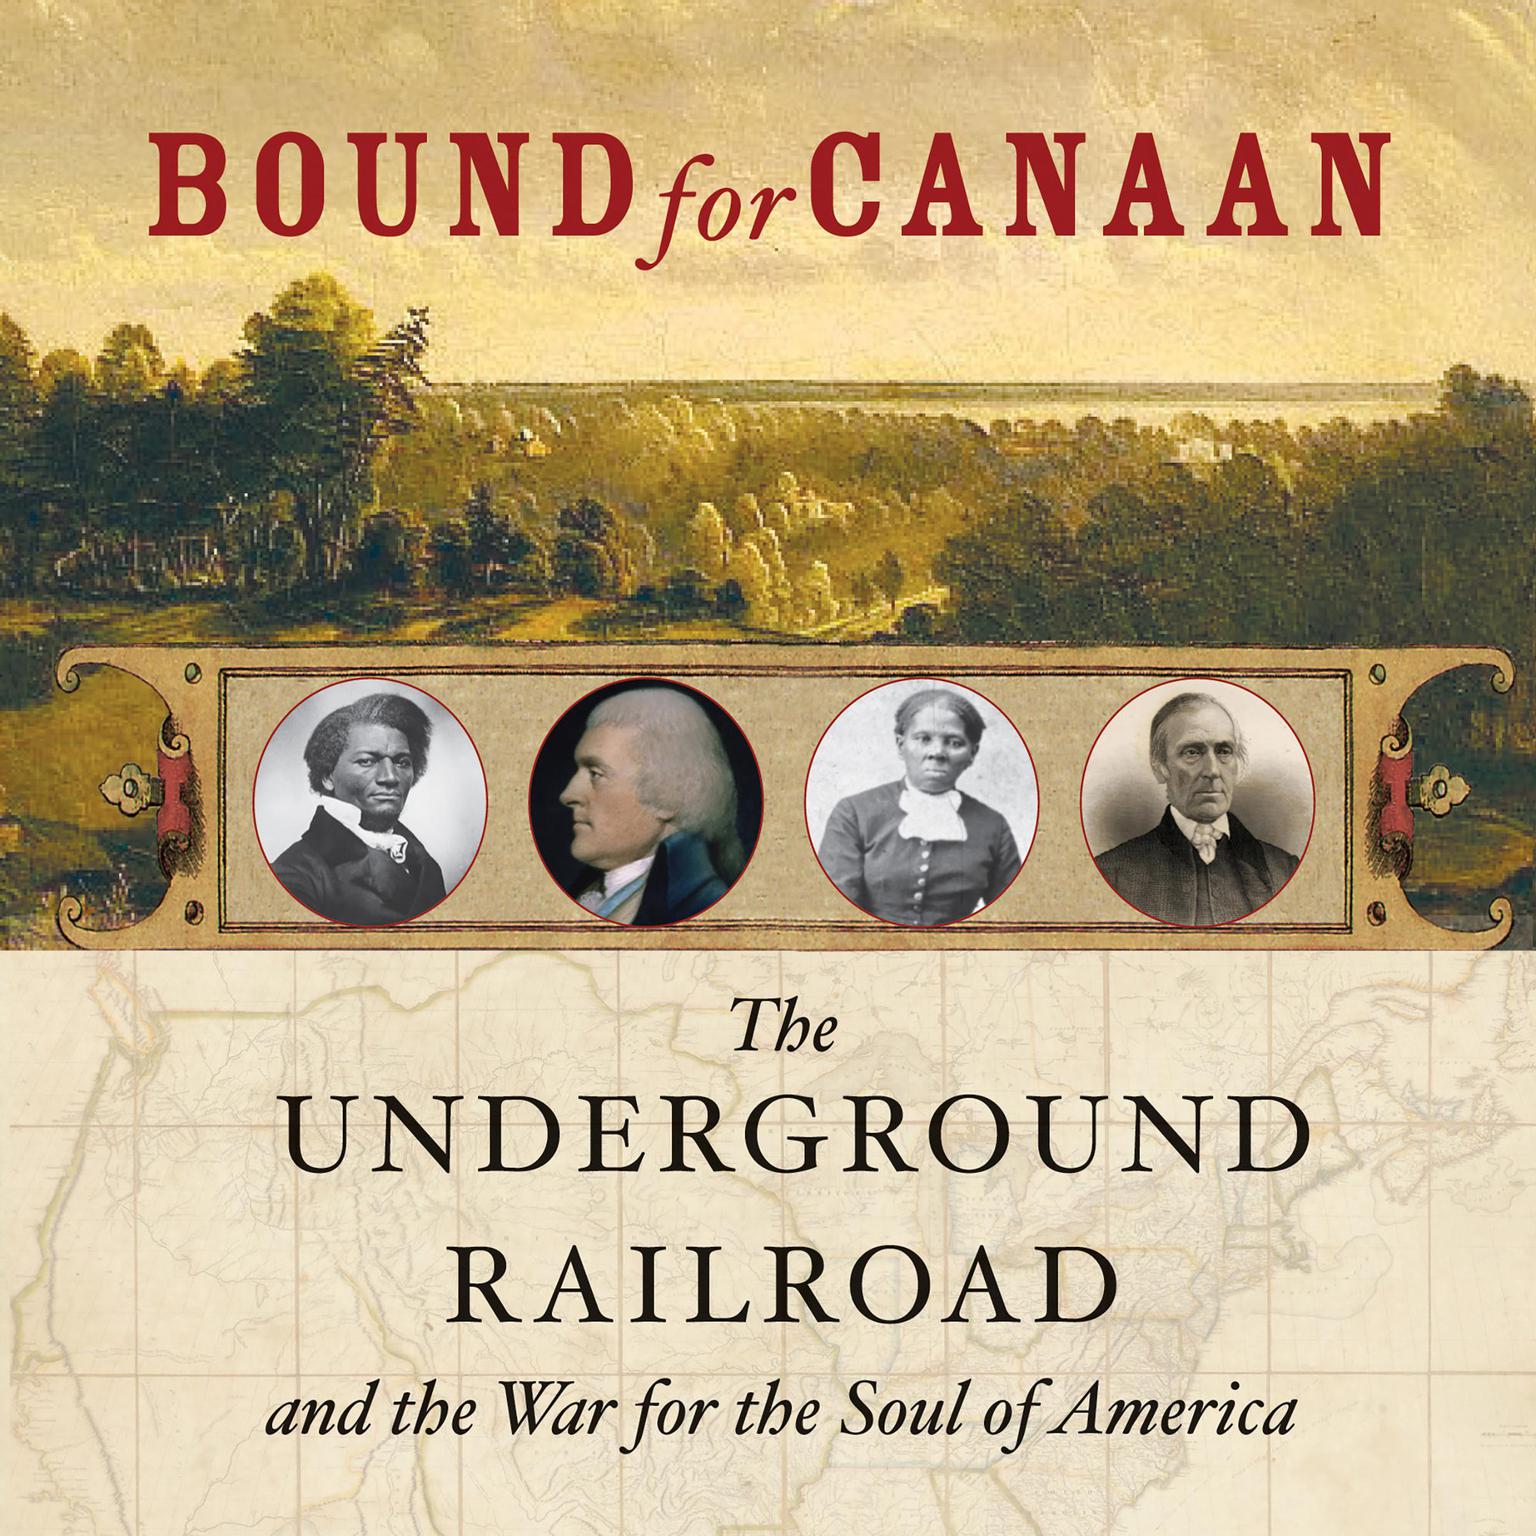 Bound for Canaan (Abridged): The Underground Railroad and the War for the Soul of America  Audiobook, by Fergus M. Bordewich